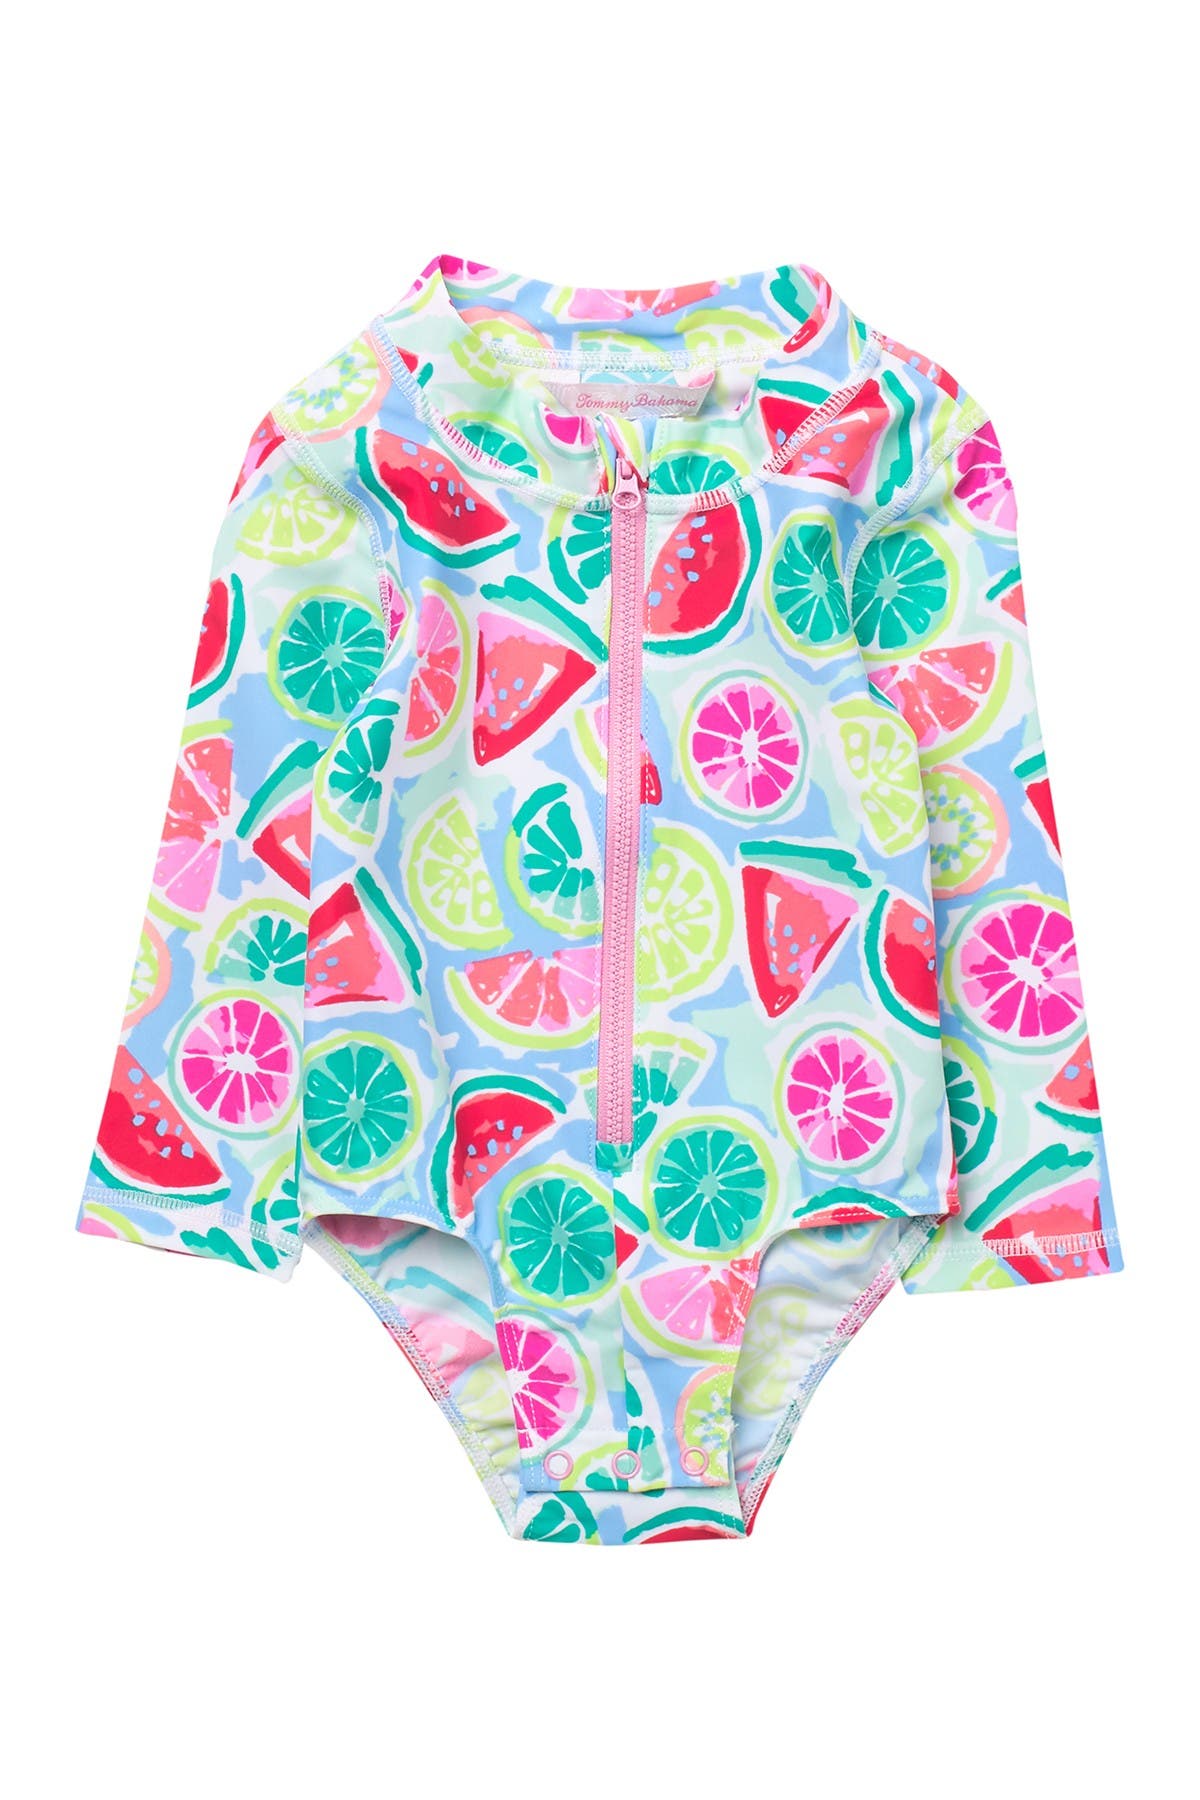 tommy bahama toddler clothes